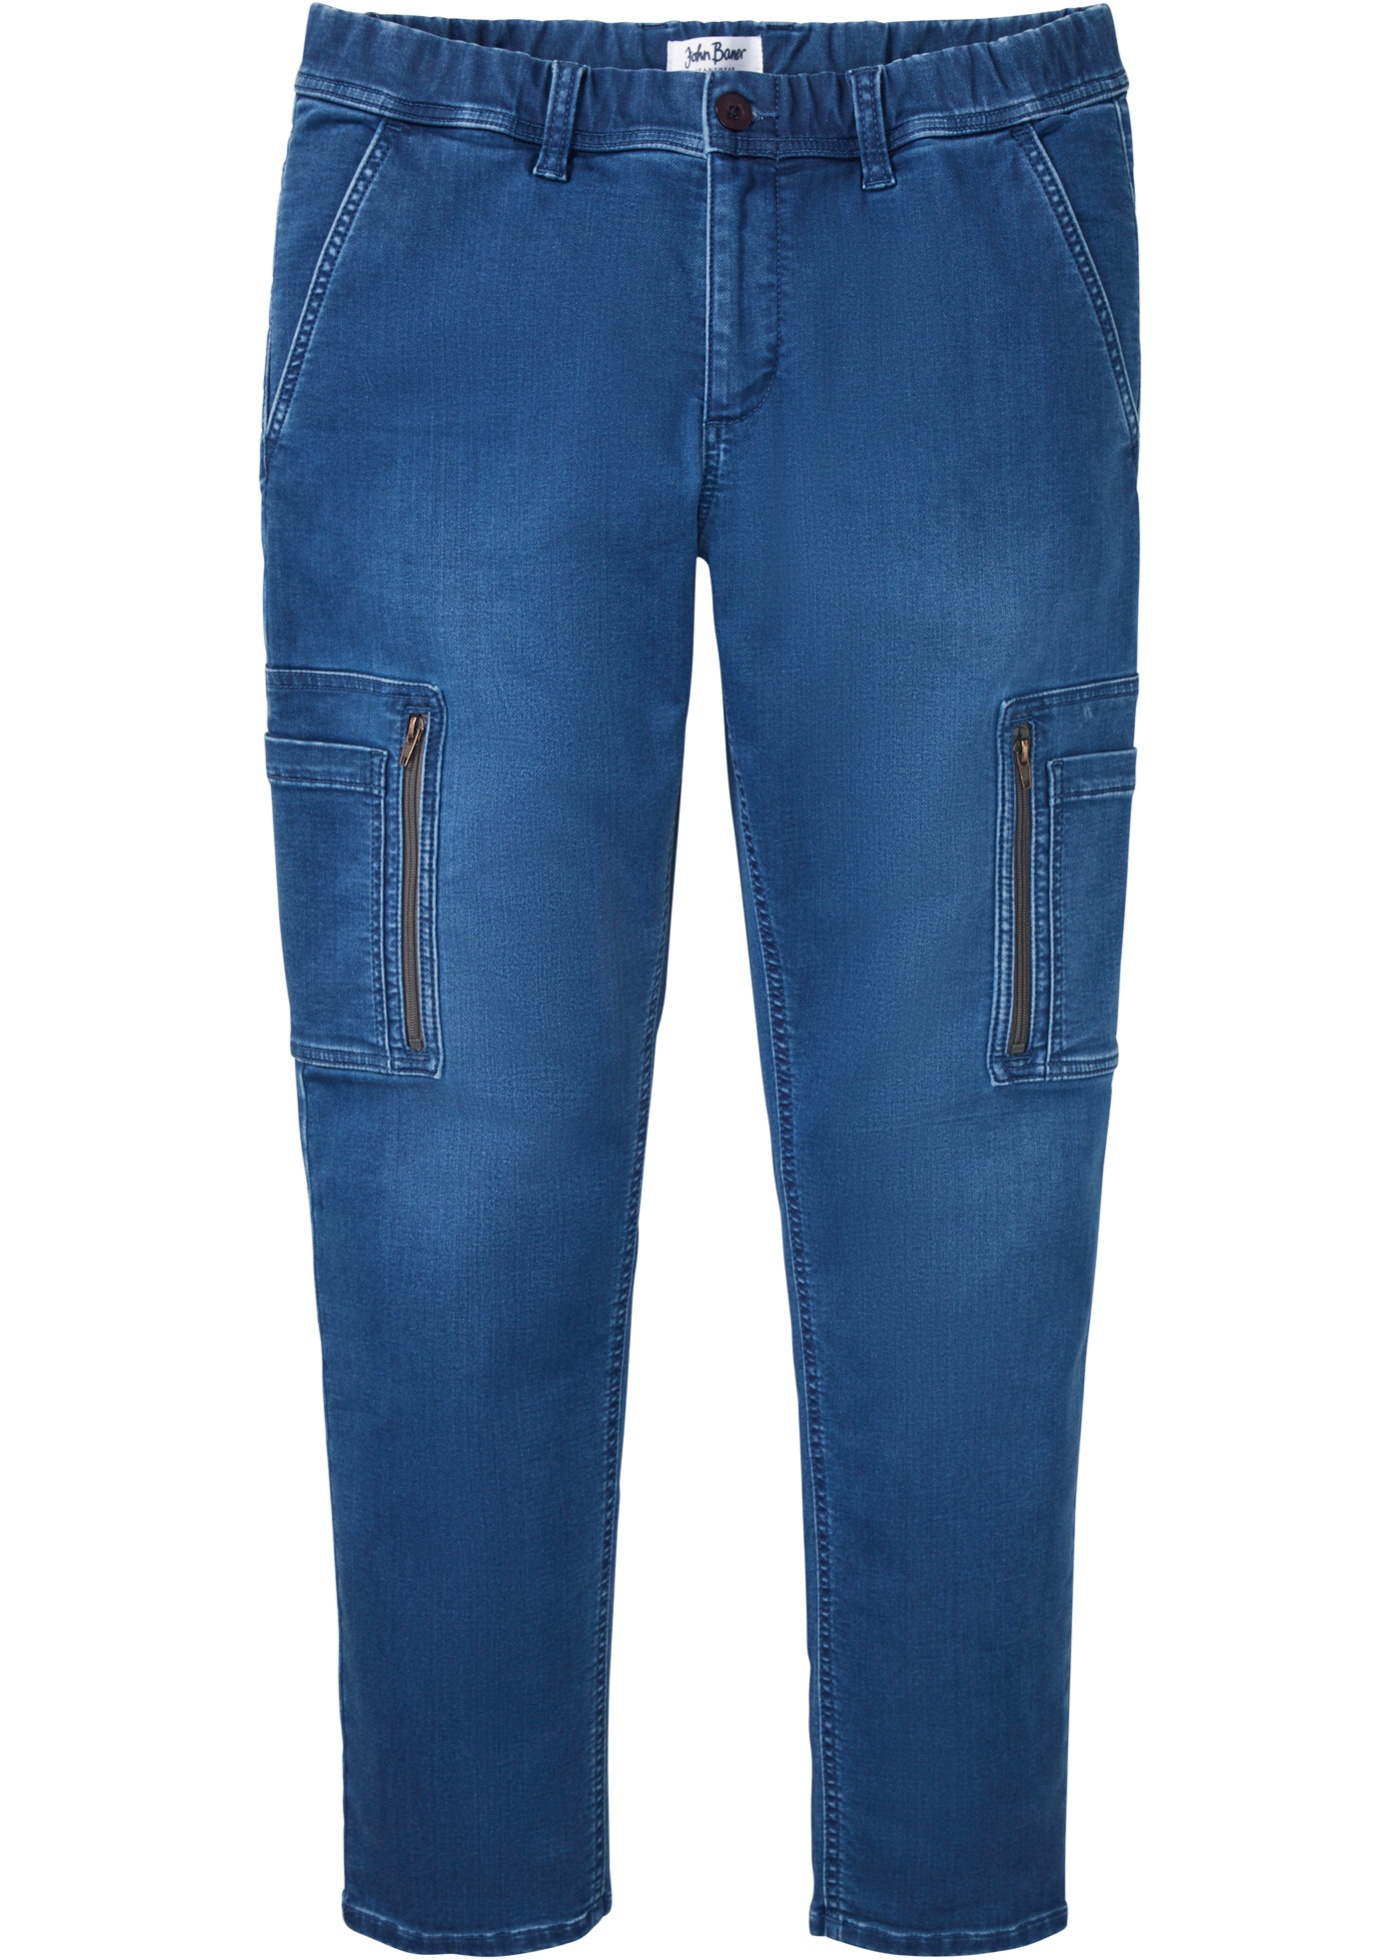 Jean cargo extensible, Loose Fit